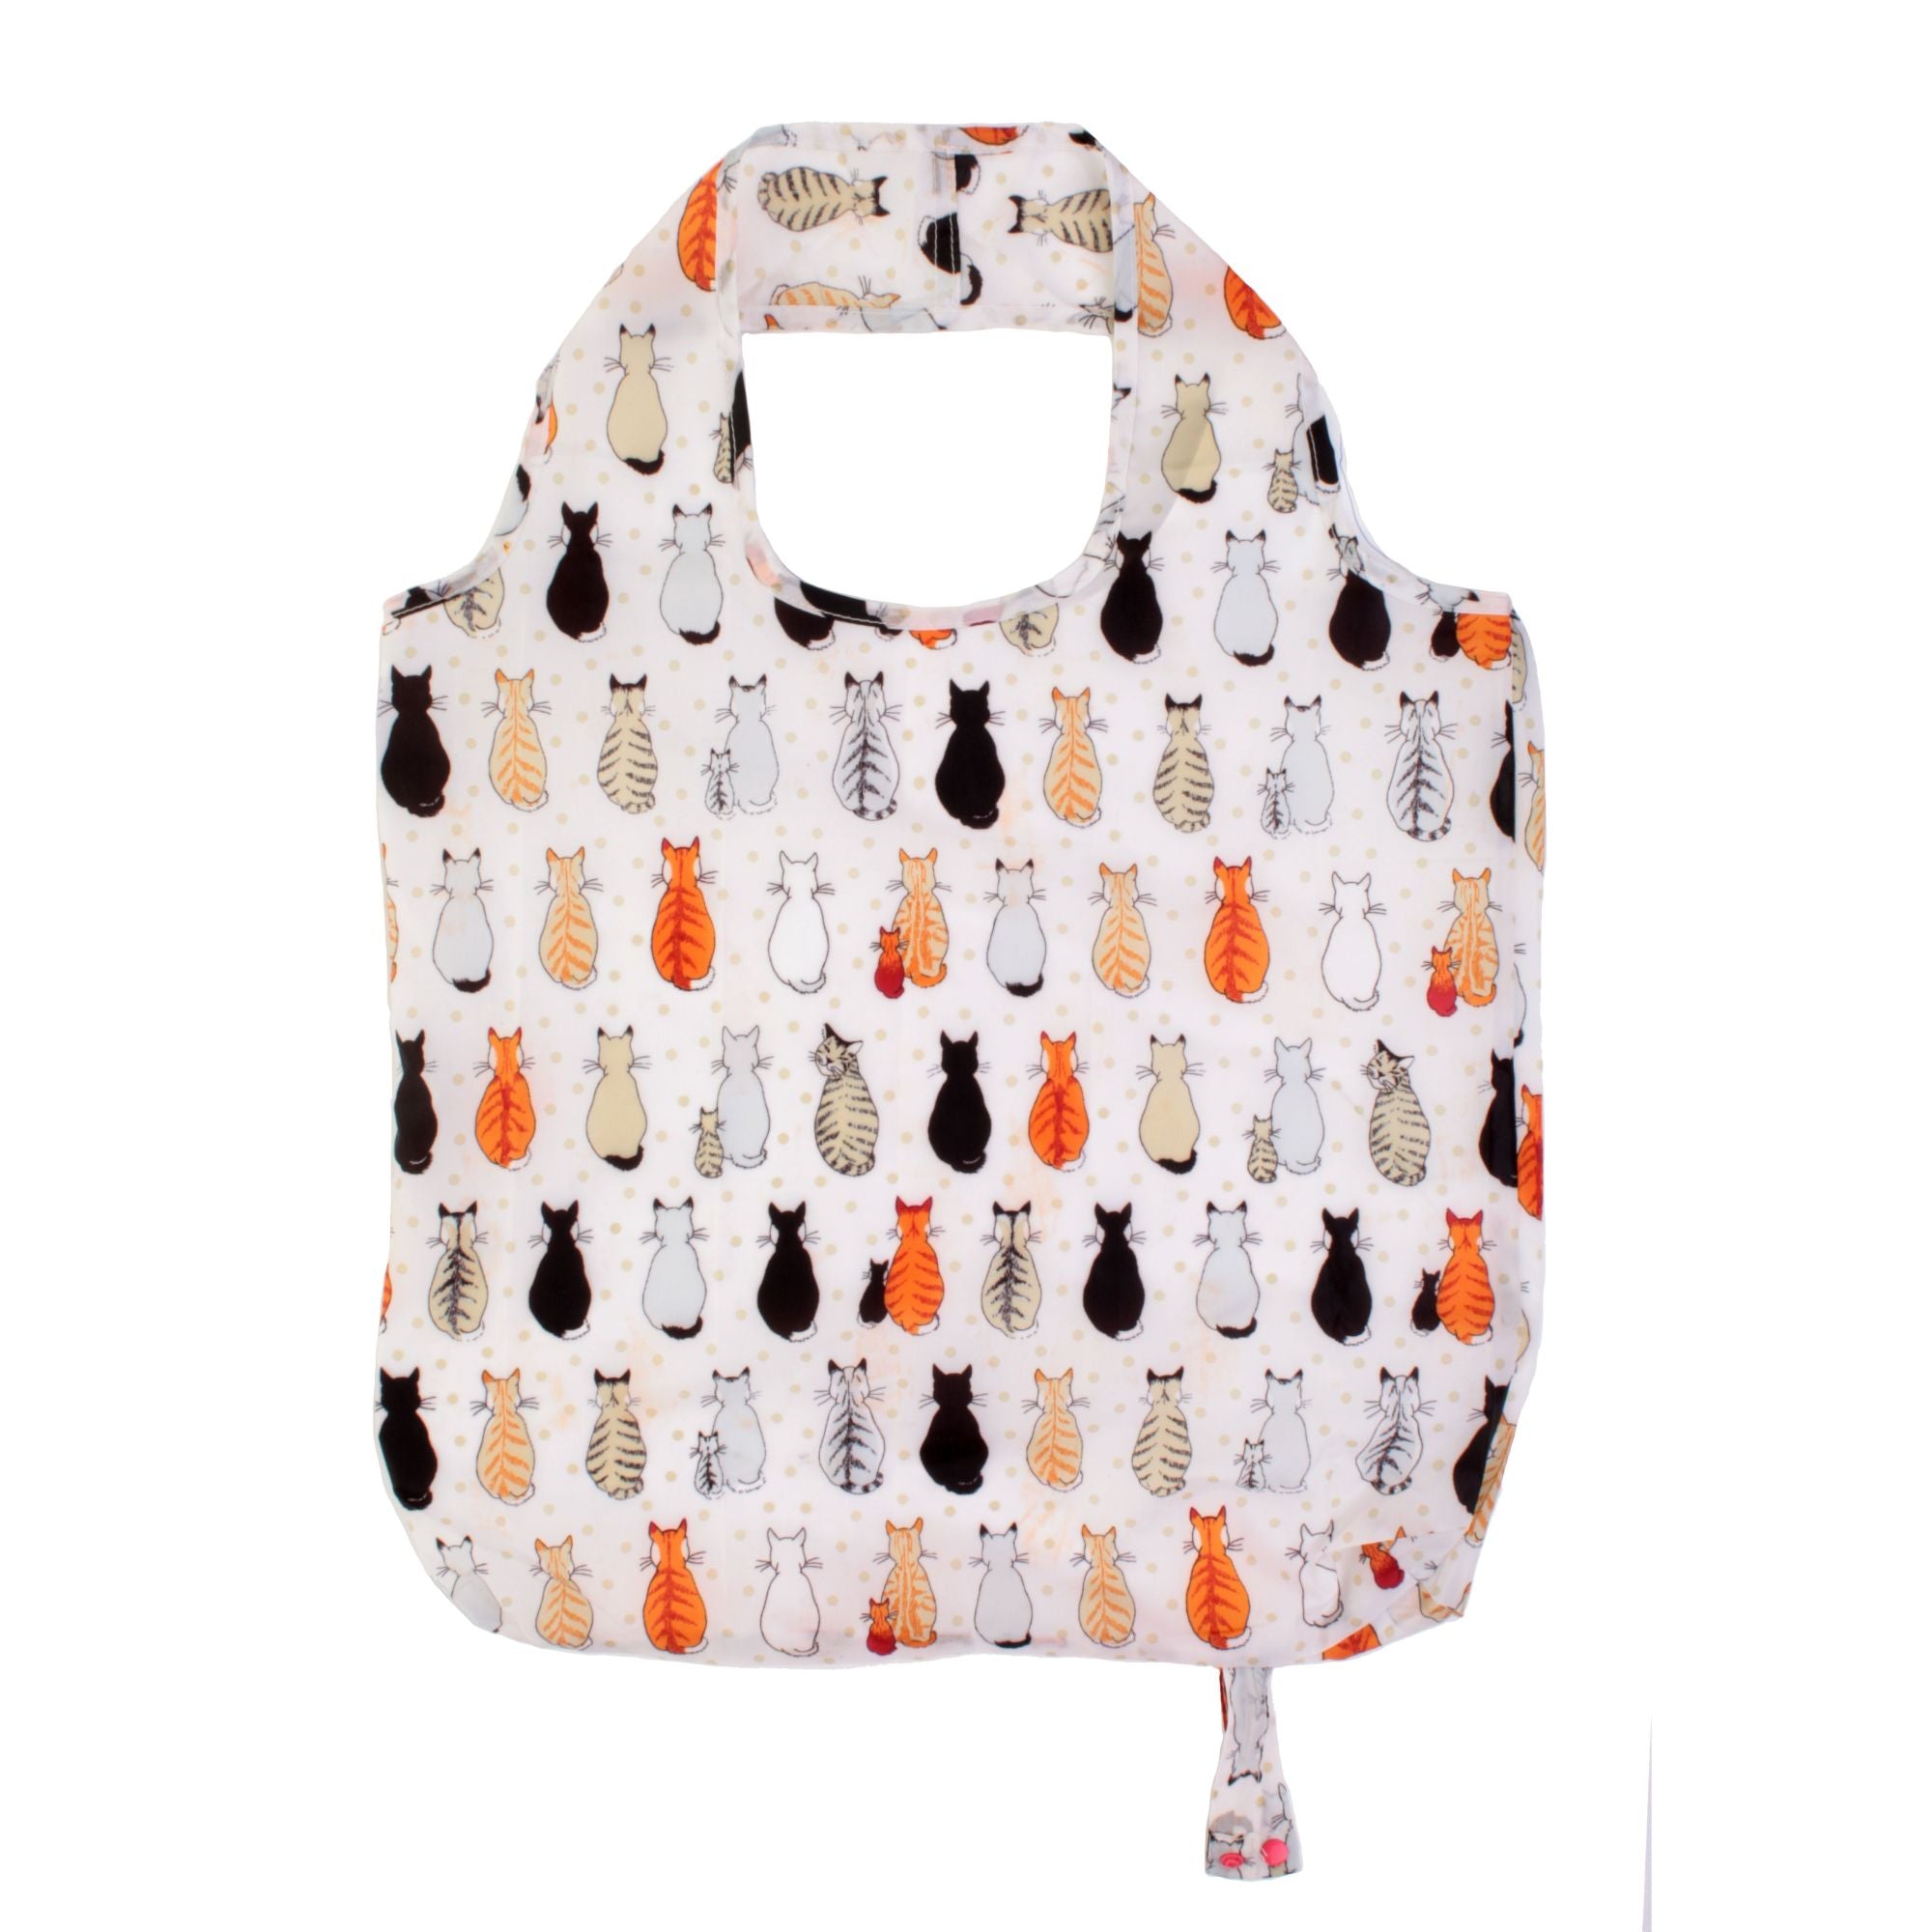 Cats in Waiting foldable shopper bag by Ulster Weavers